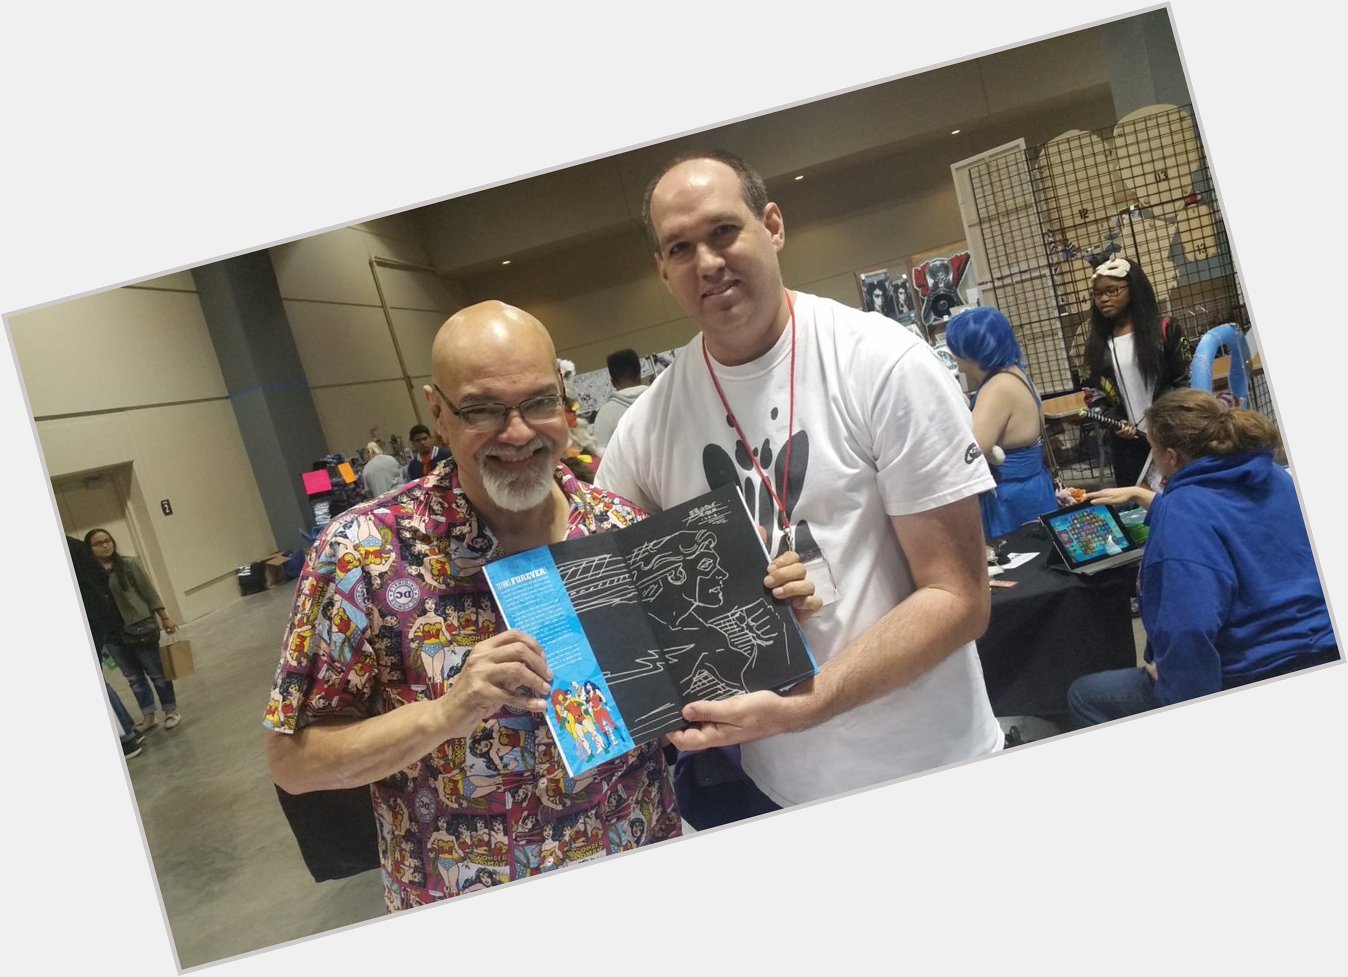  Happy birthday to my favorite artist George Perez, it was an honor meeting you in Memphis in 2016. 